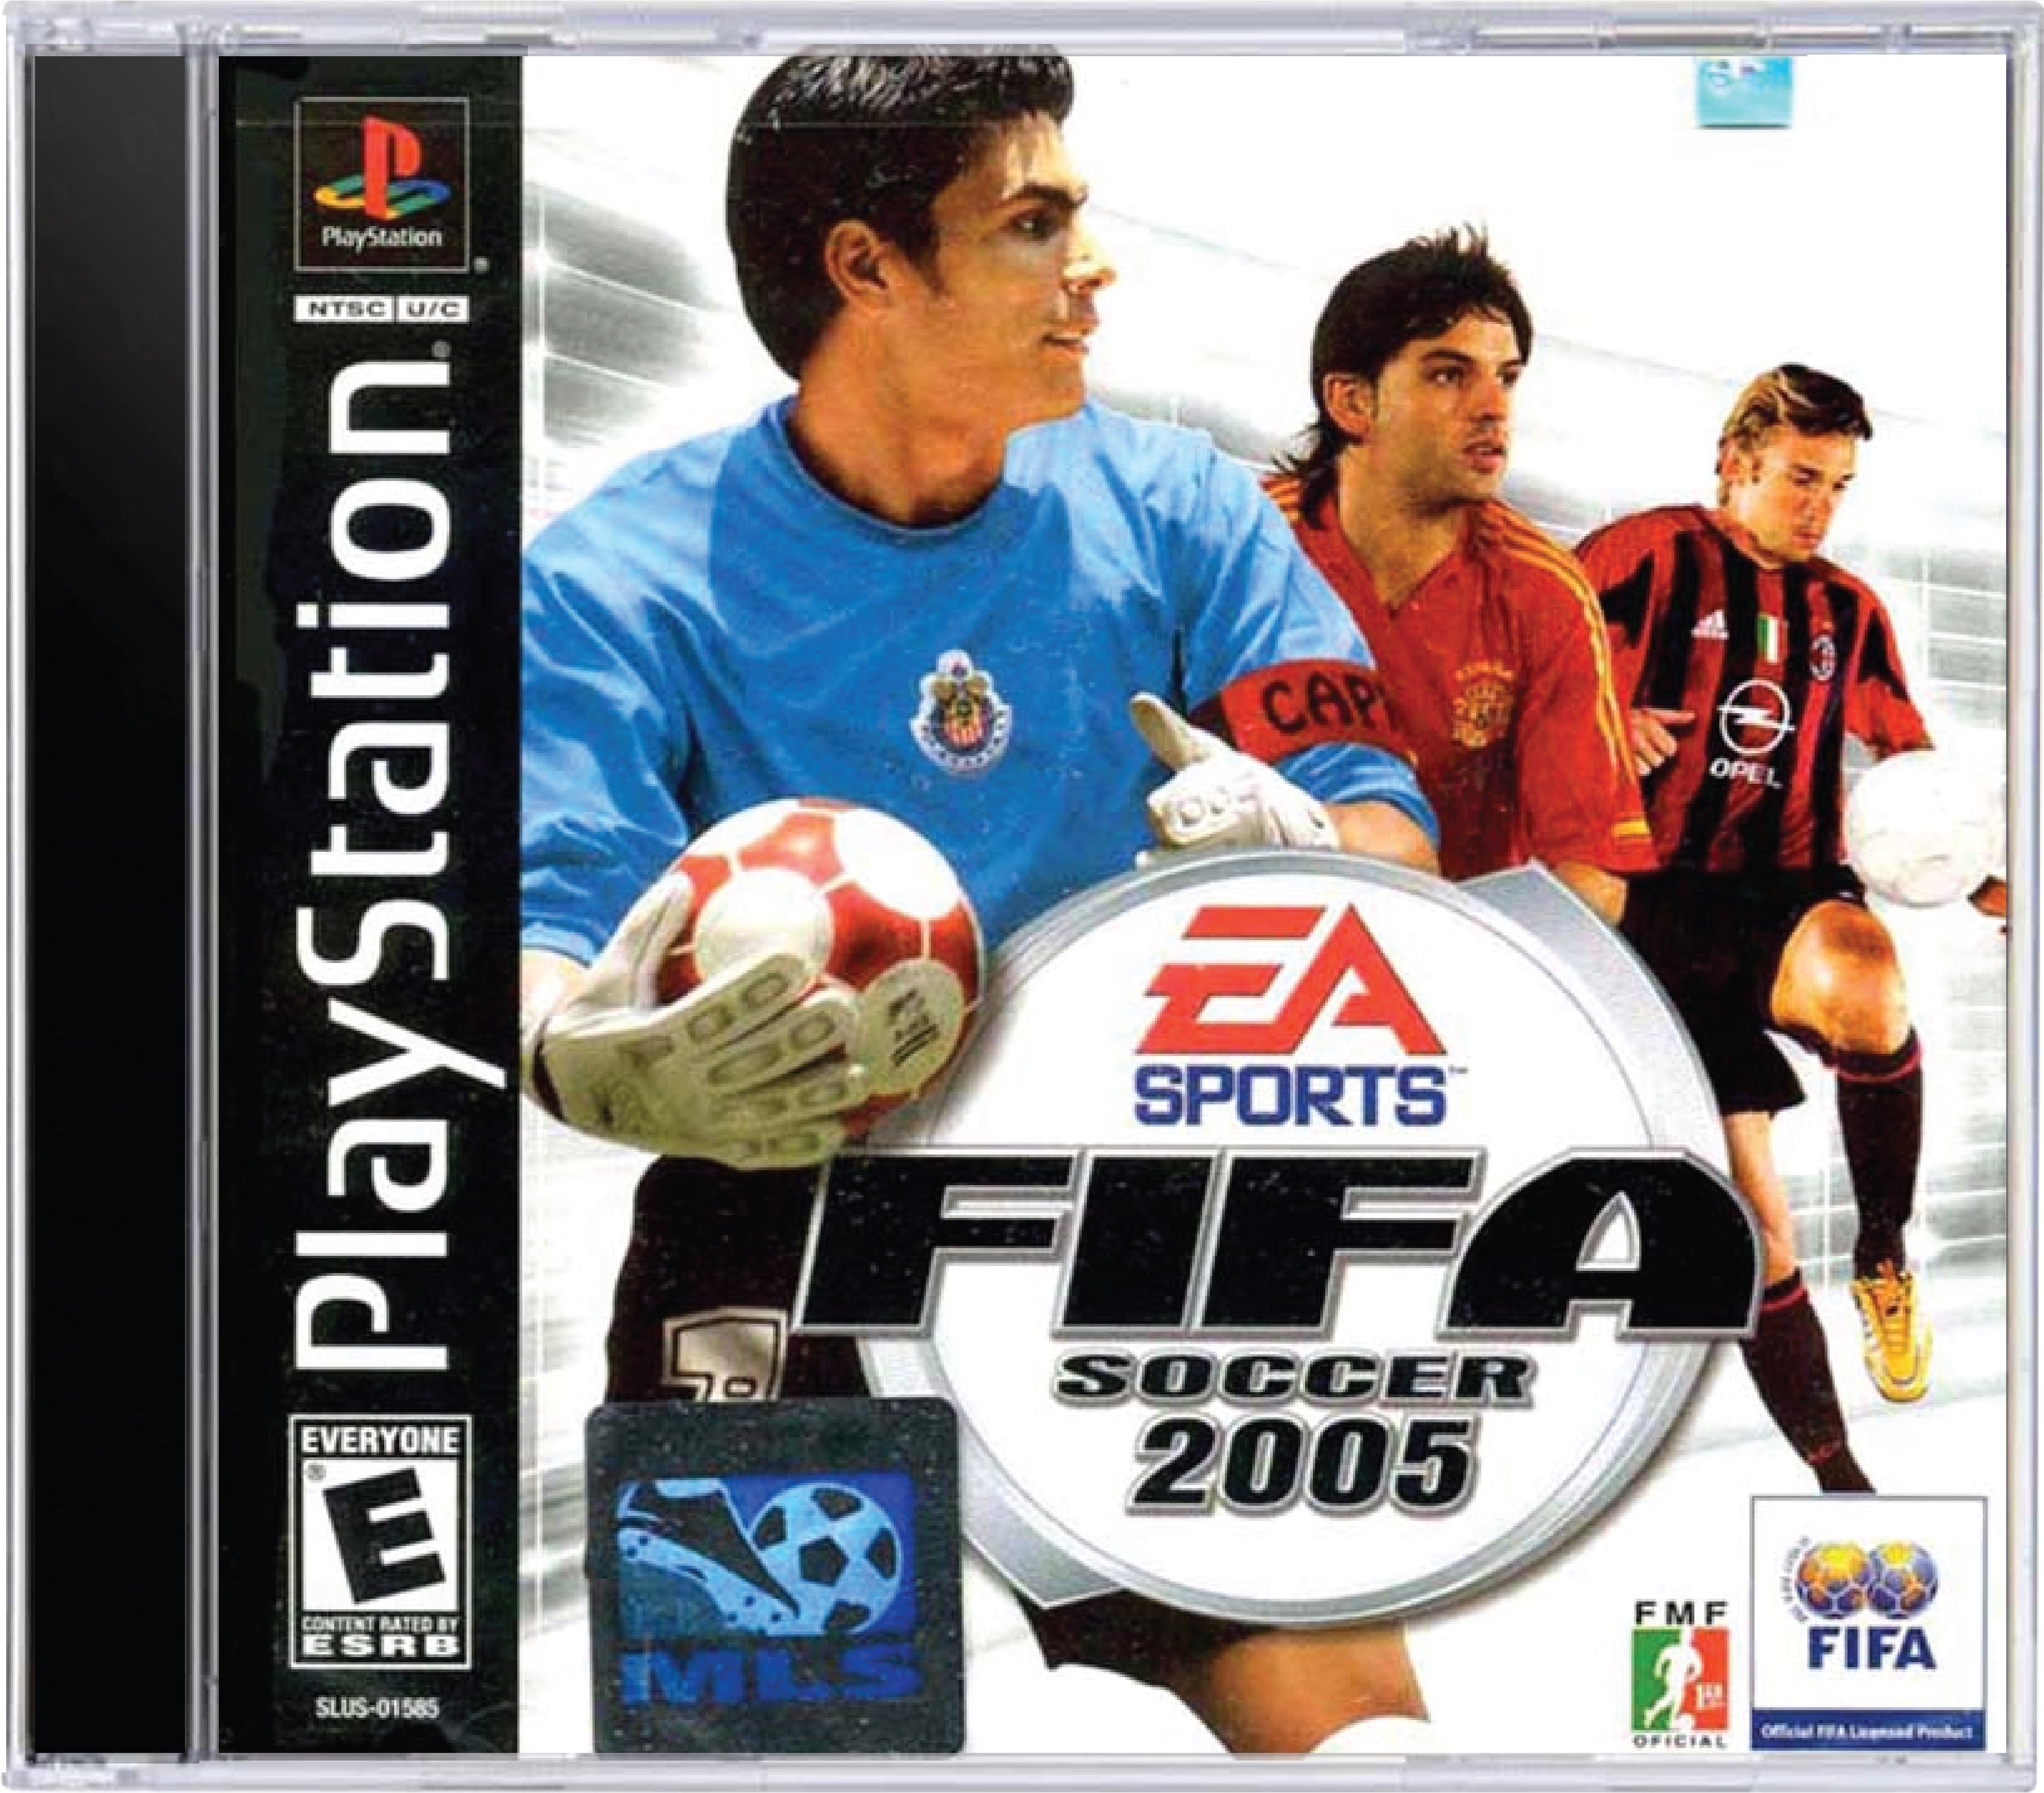 FIFA 2005 Cover Art and Product Photo